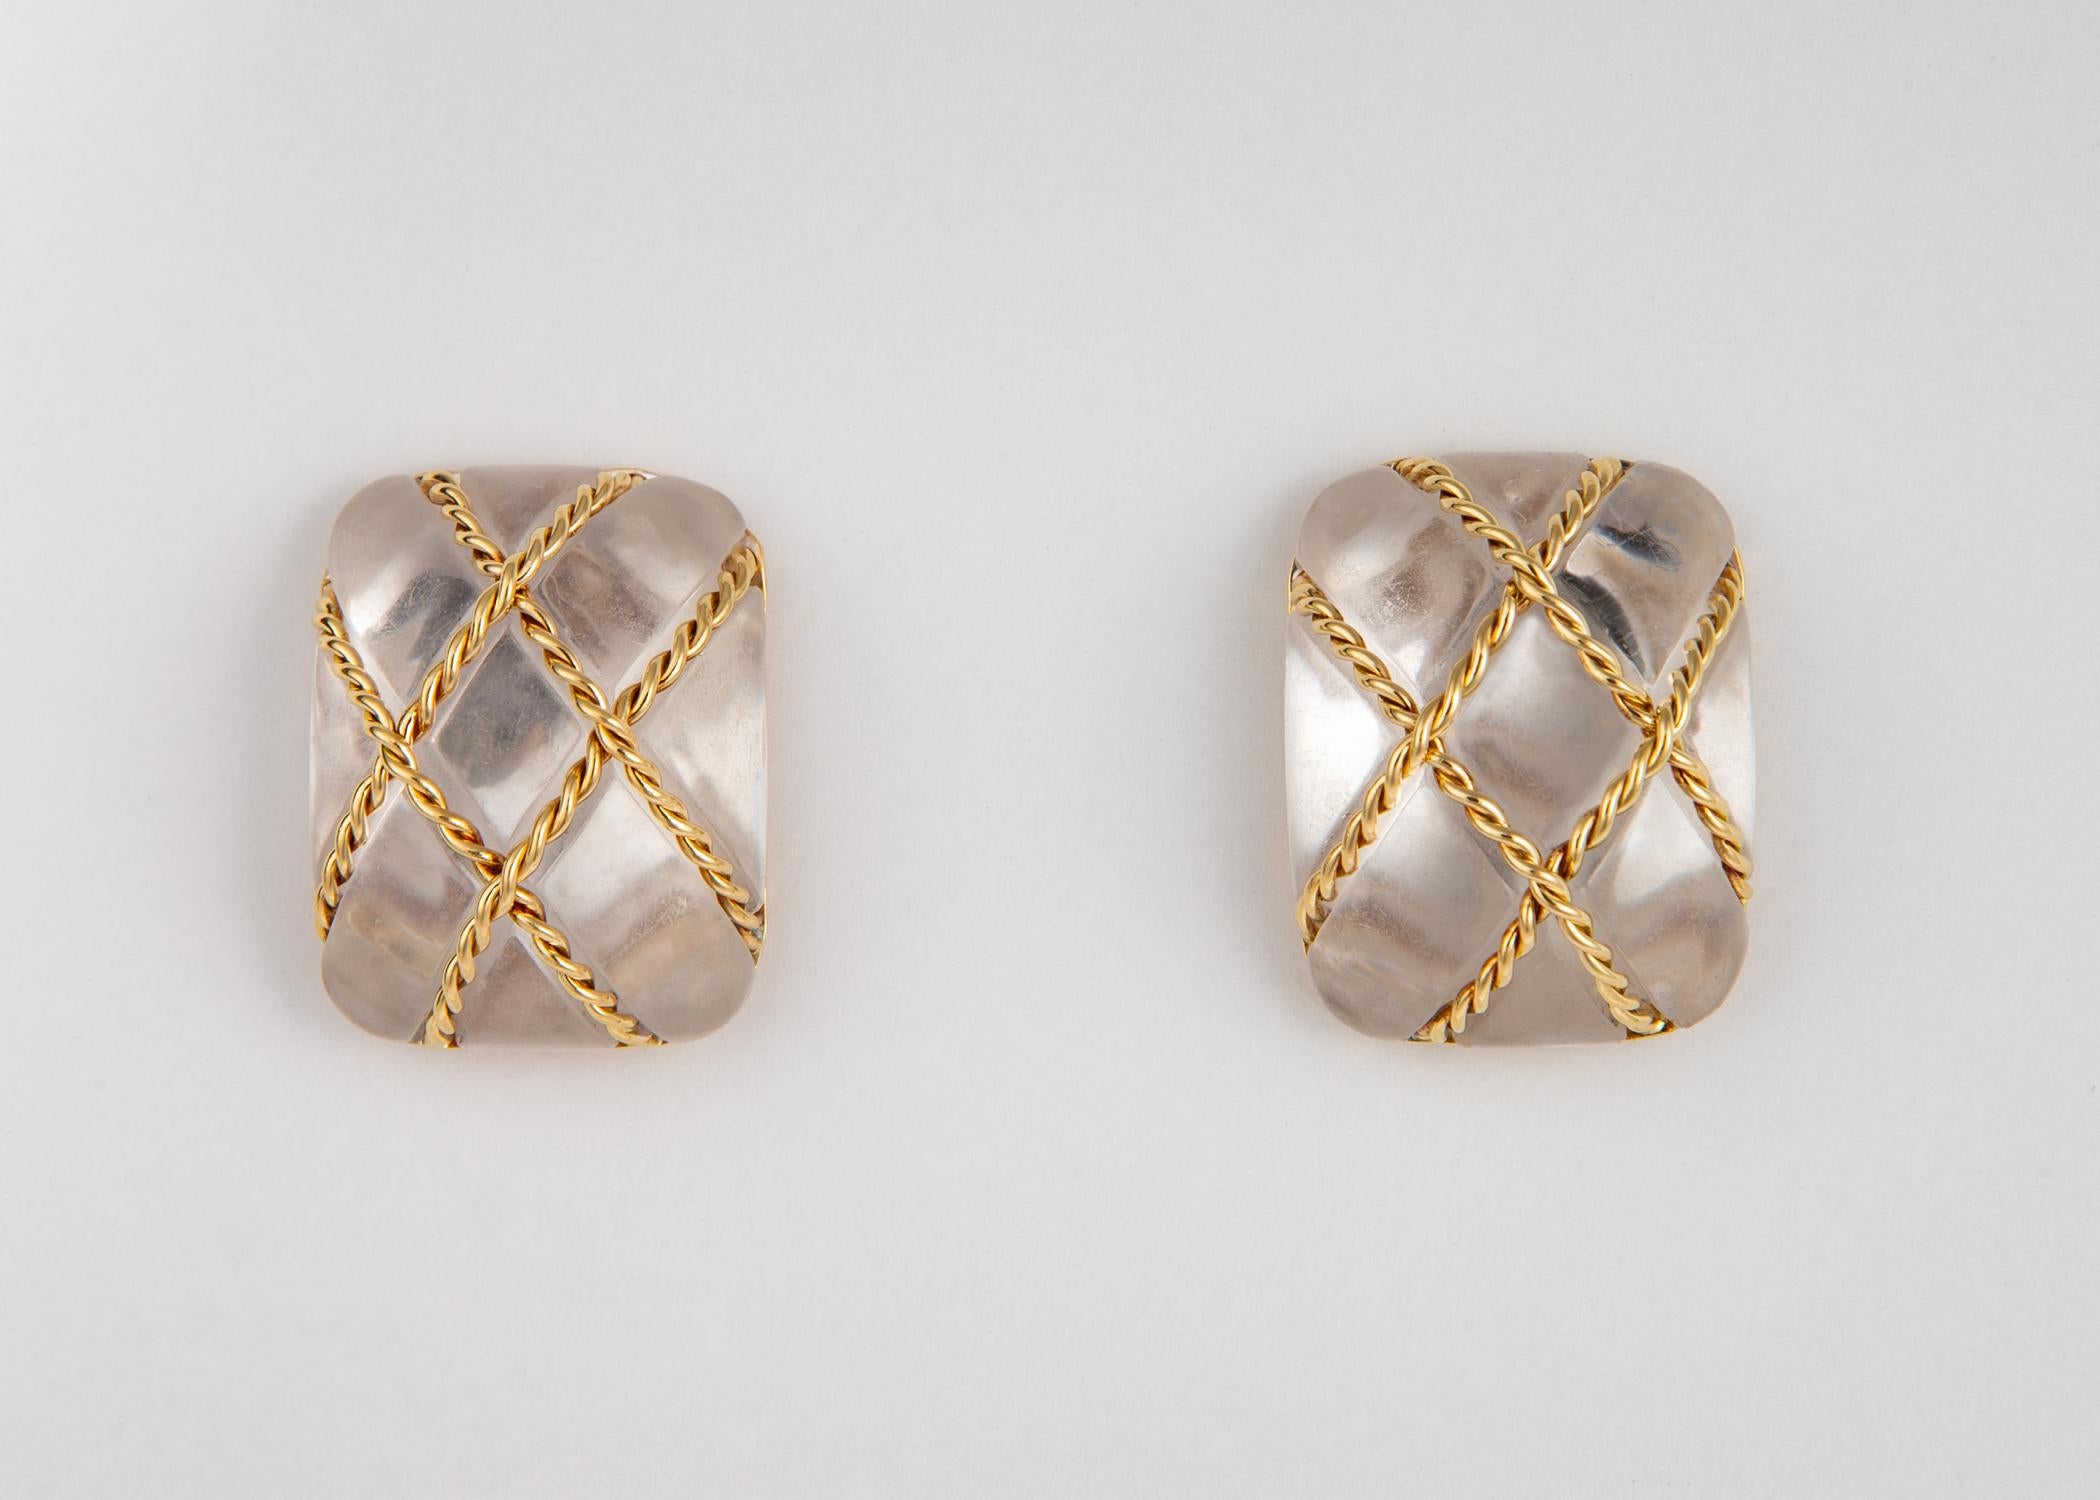 Seaman Schepps Cage earring is a true classic. Rock crystal offers a bright neutral easy to wear earring thats simple and chic. 26mm x 20mm  A perfect 1 inch size.